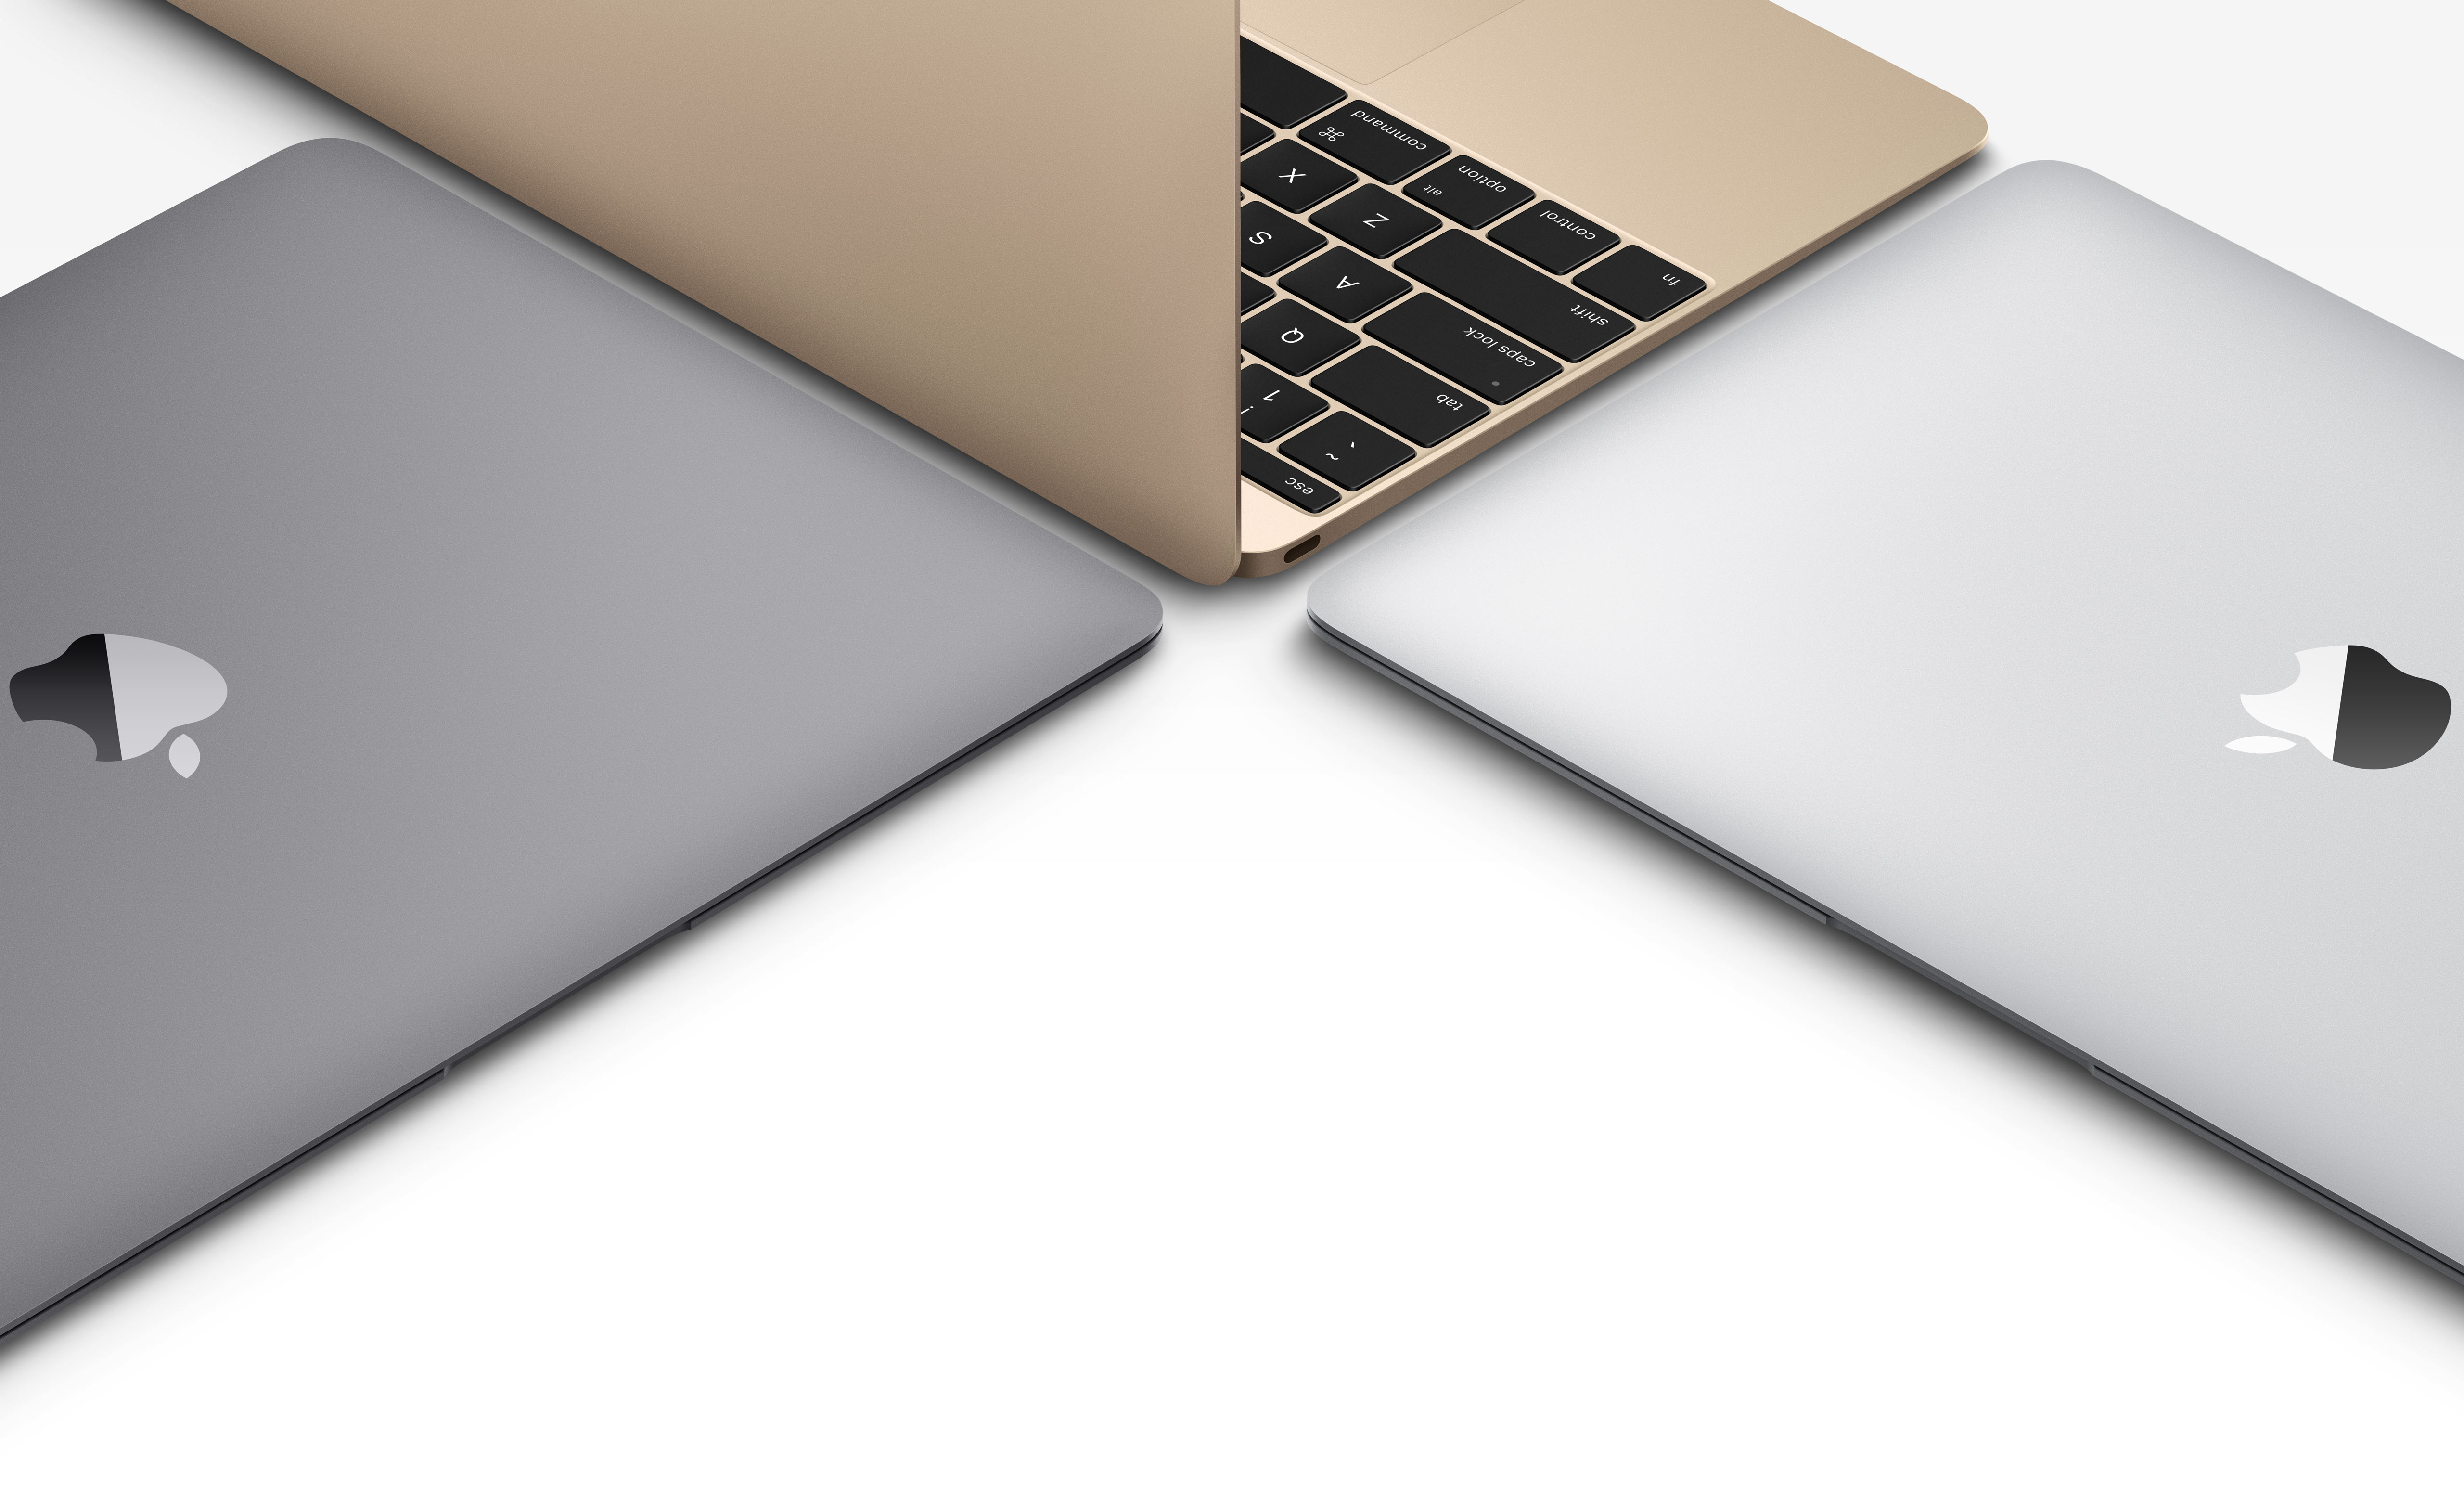 Poll: which new MacBook finish would you opt for?